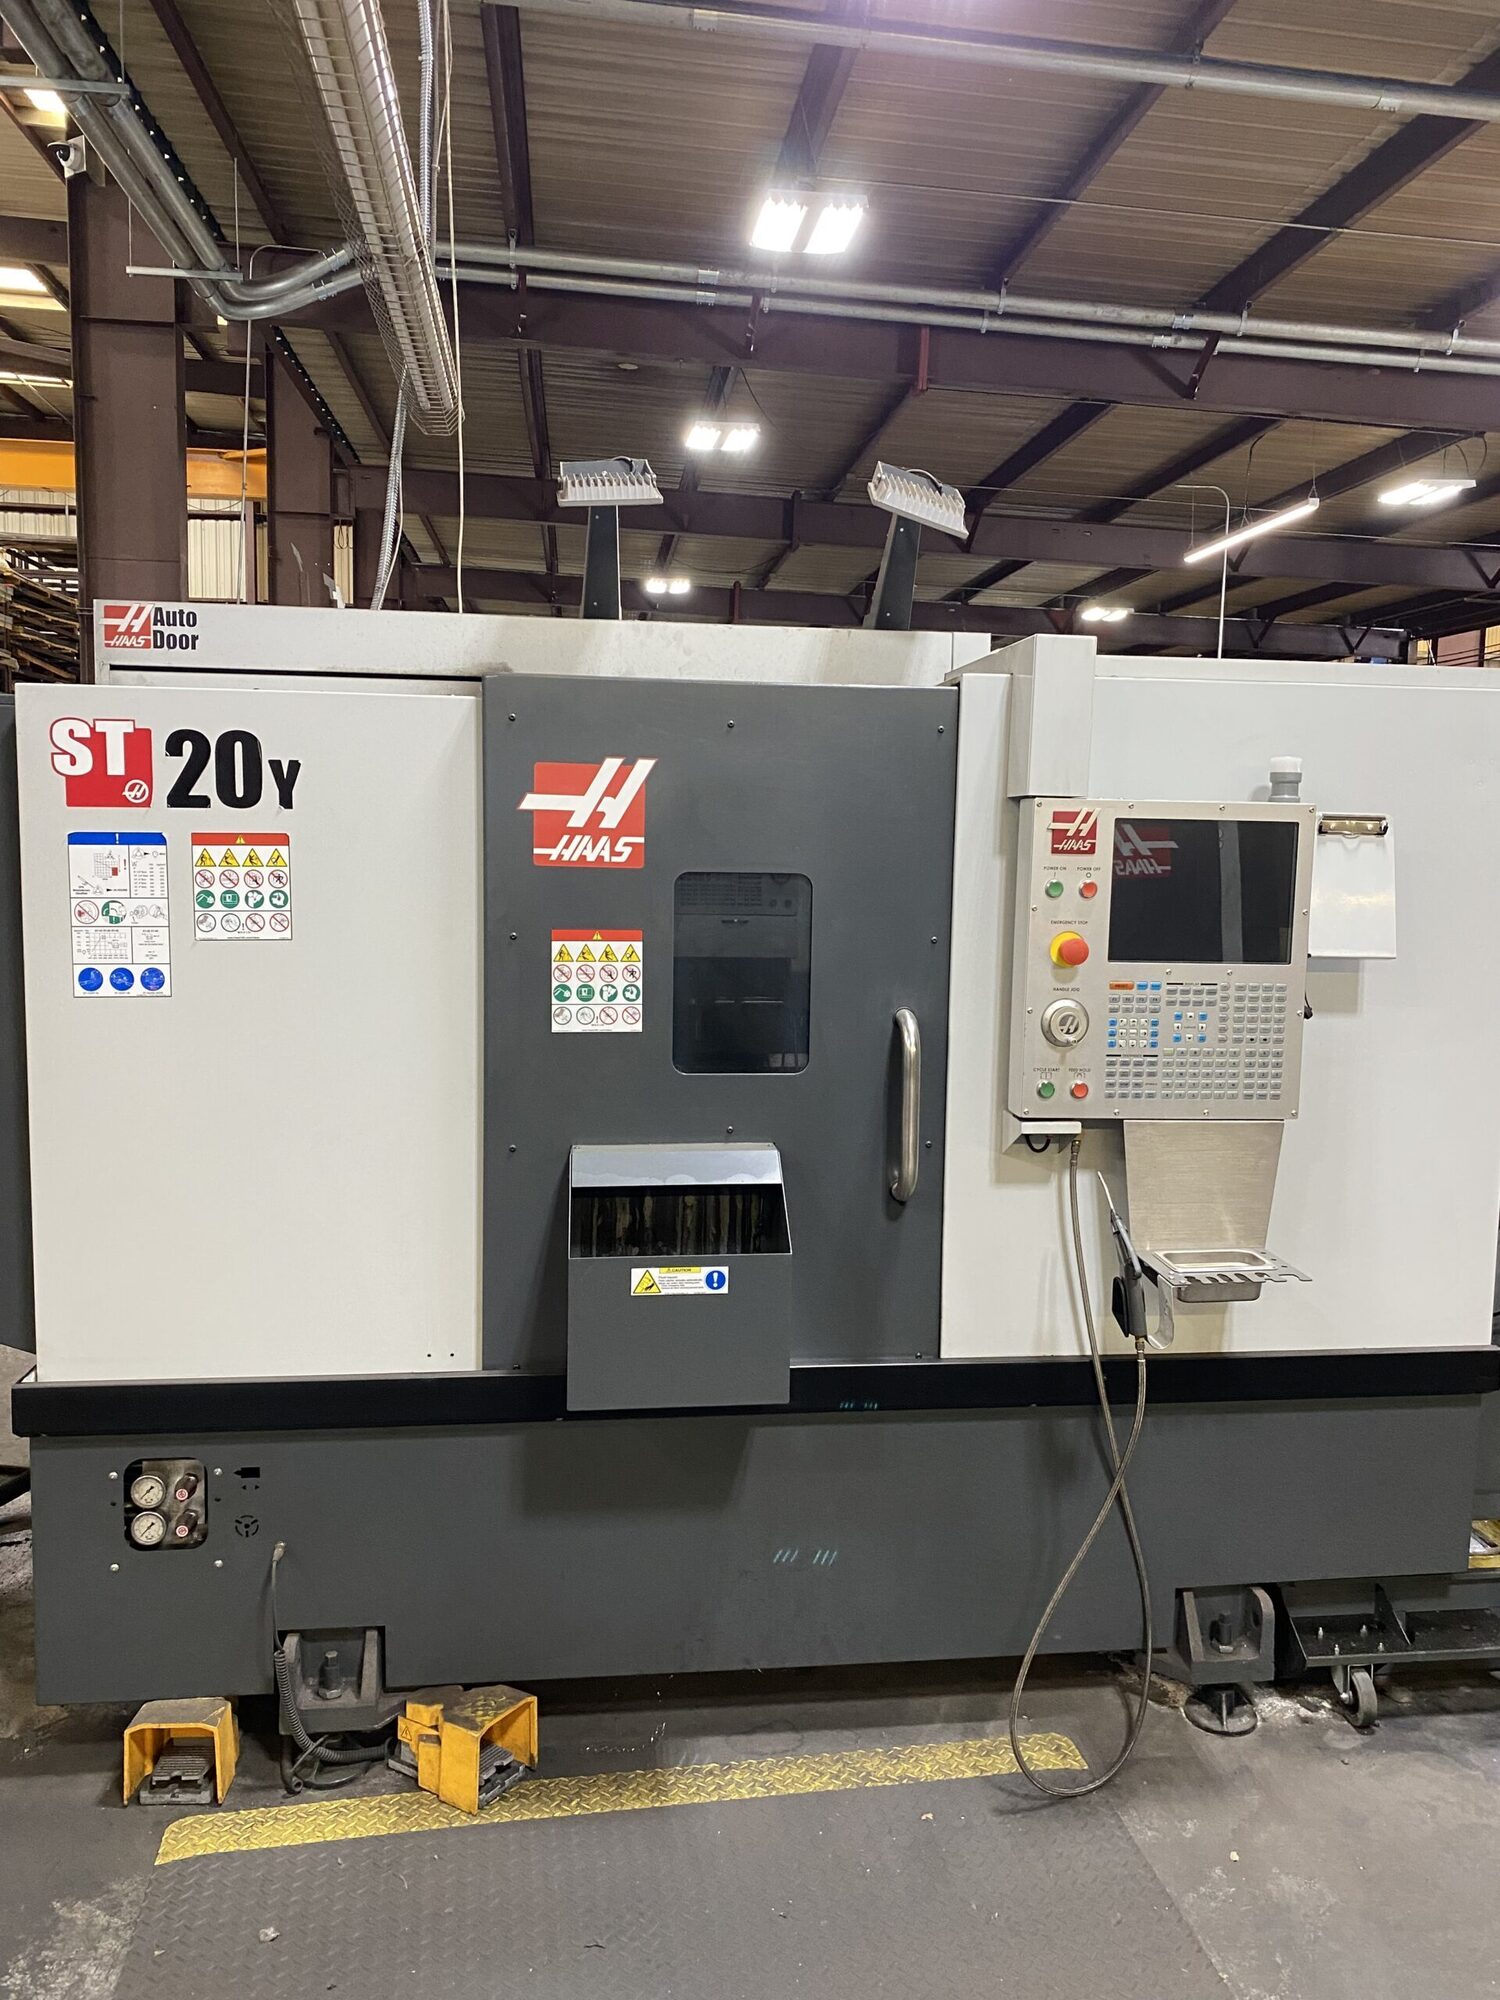 2020 HAAS ST-20Y CNC Lathes | Toolquip, Inc.